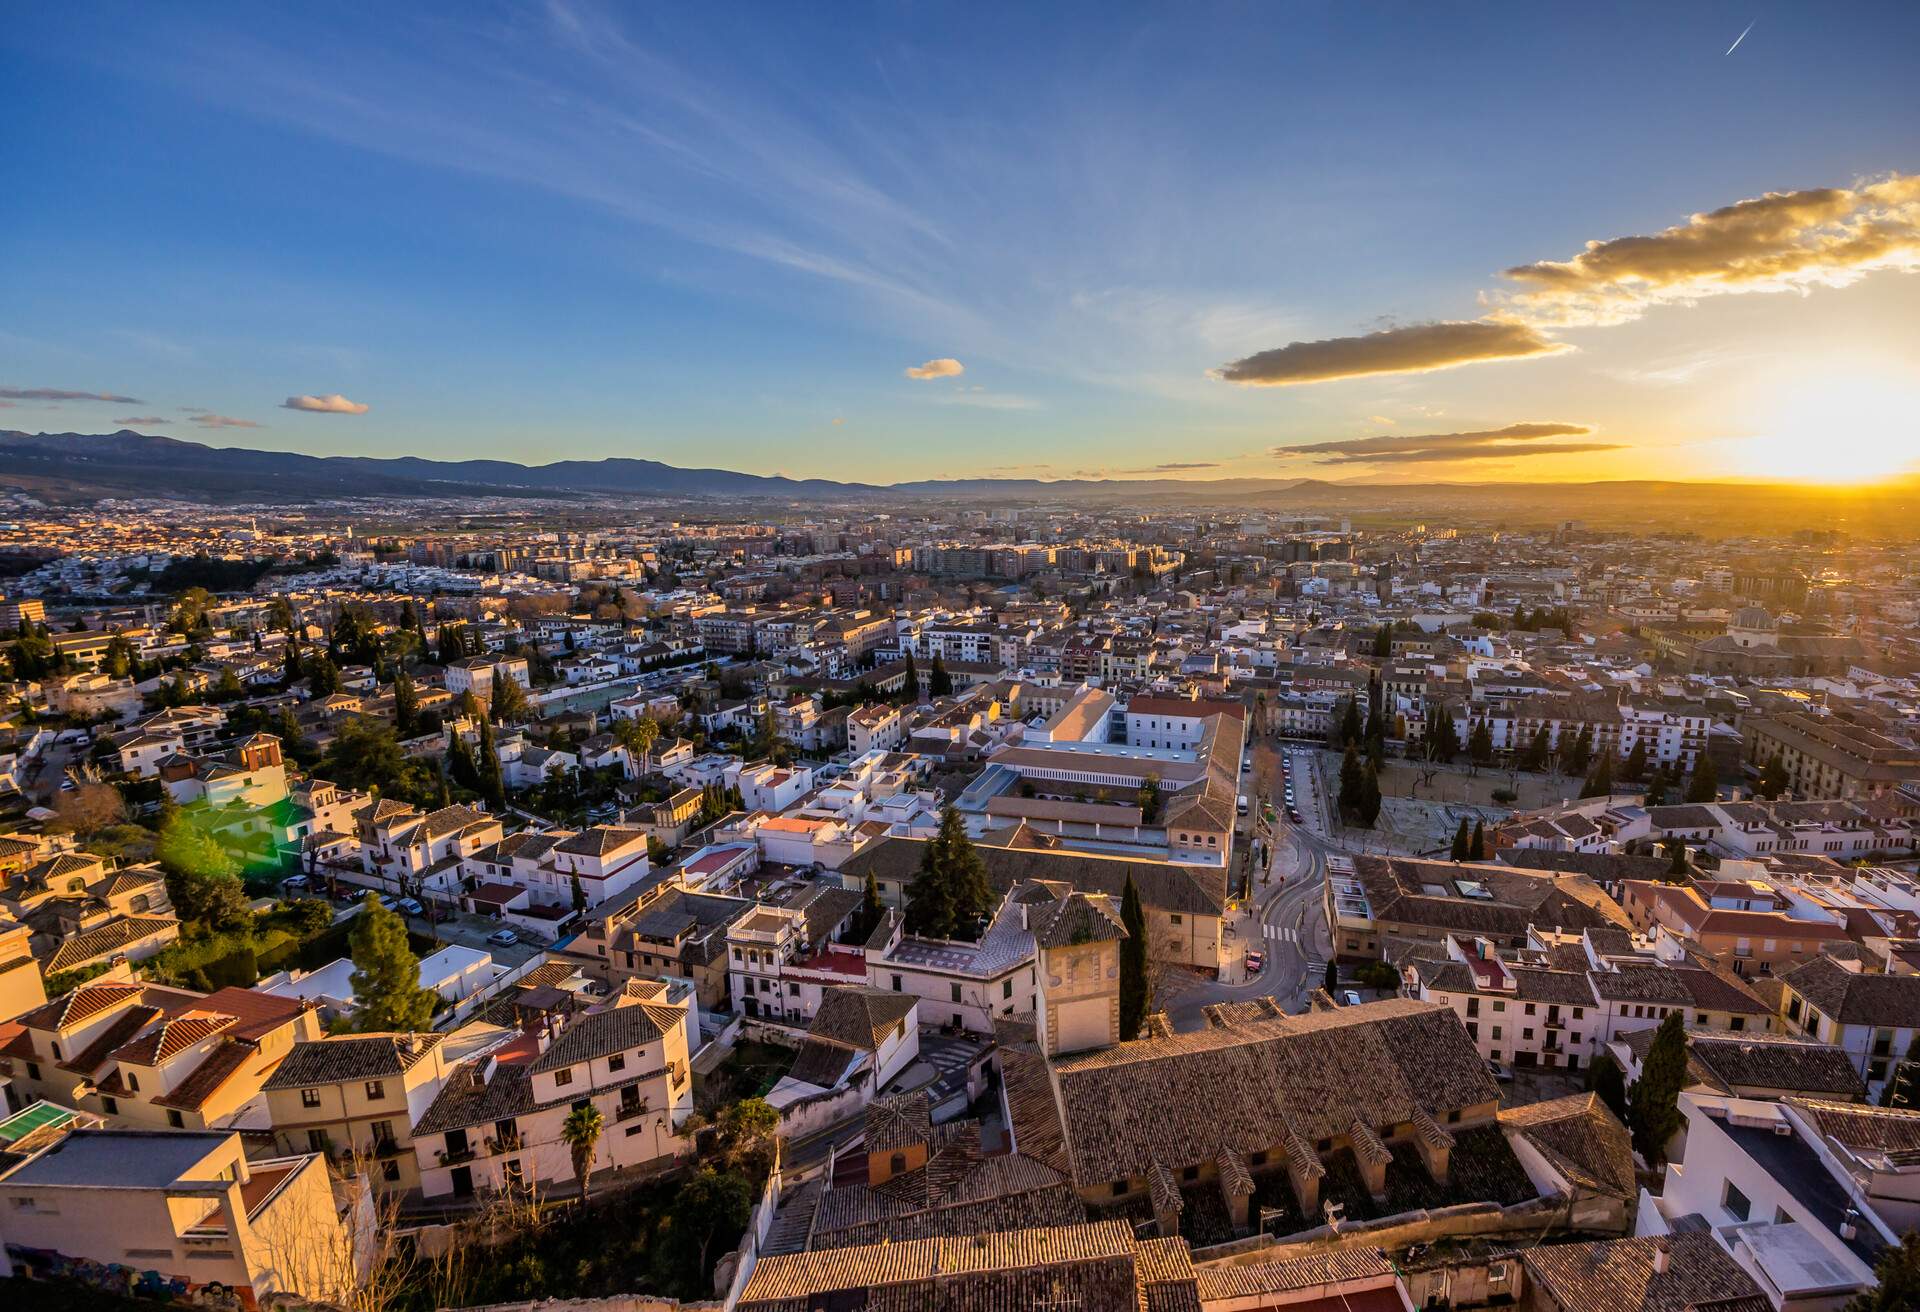 DEST_SPAIN_GRANADA_View_from_Realejo_GettyImages-557388919